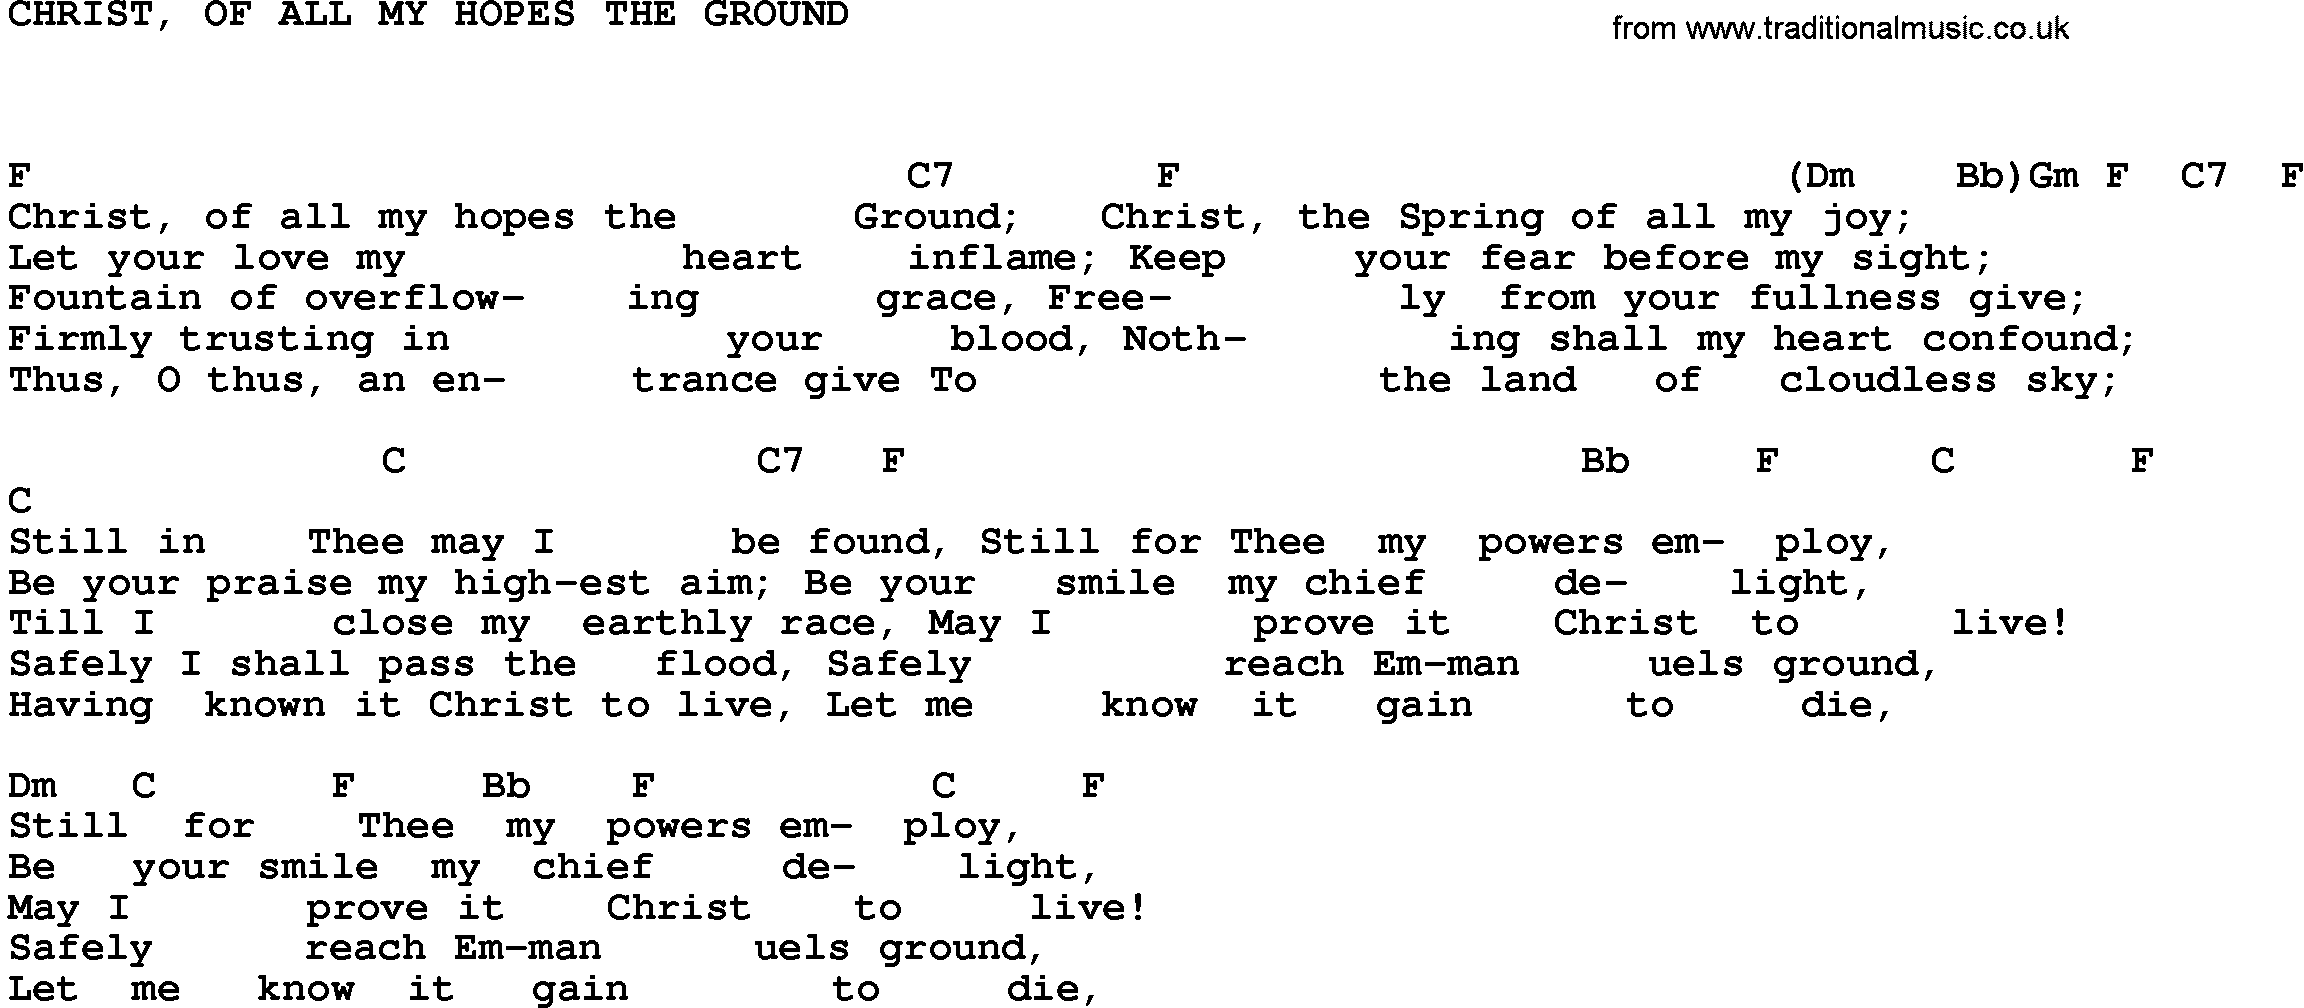 Gospel Song: Christ, Of All My Hopes The Ground-Trad, lyrics and chords.